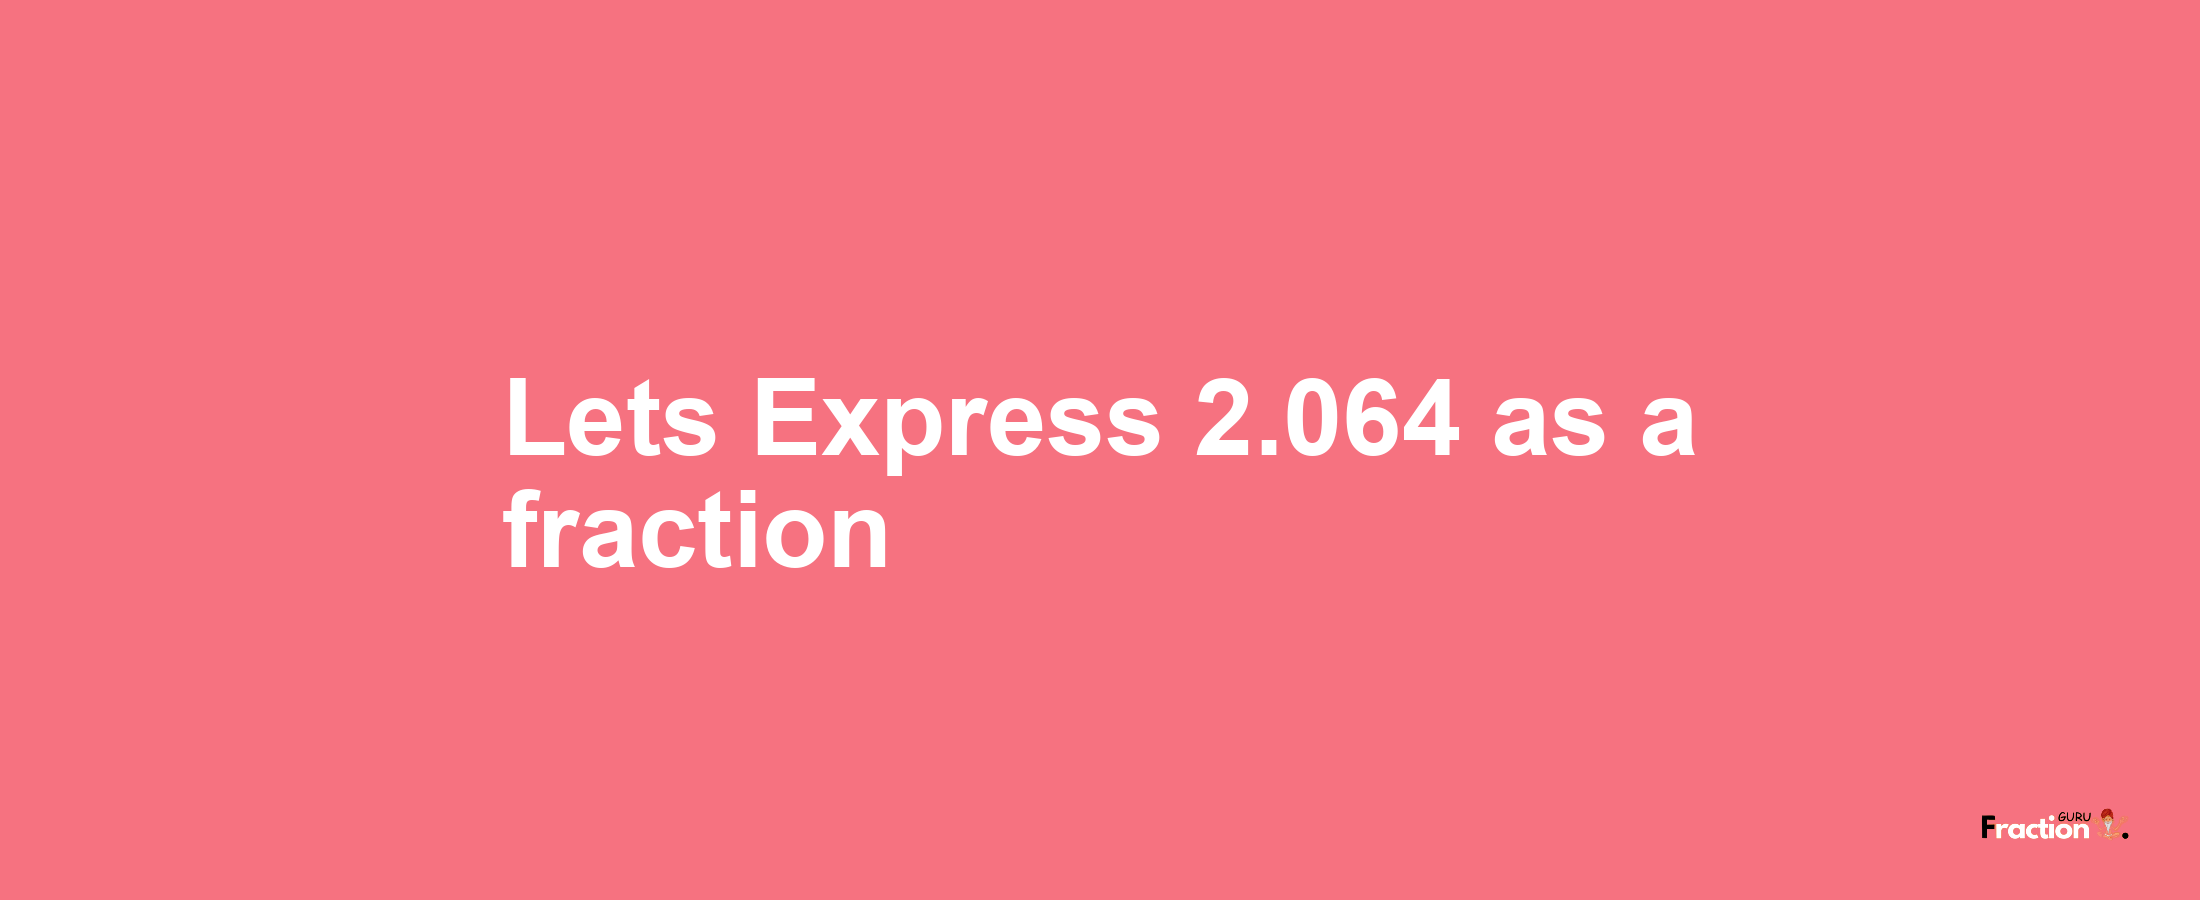 Lets Express 2.064 as afraction